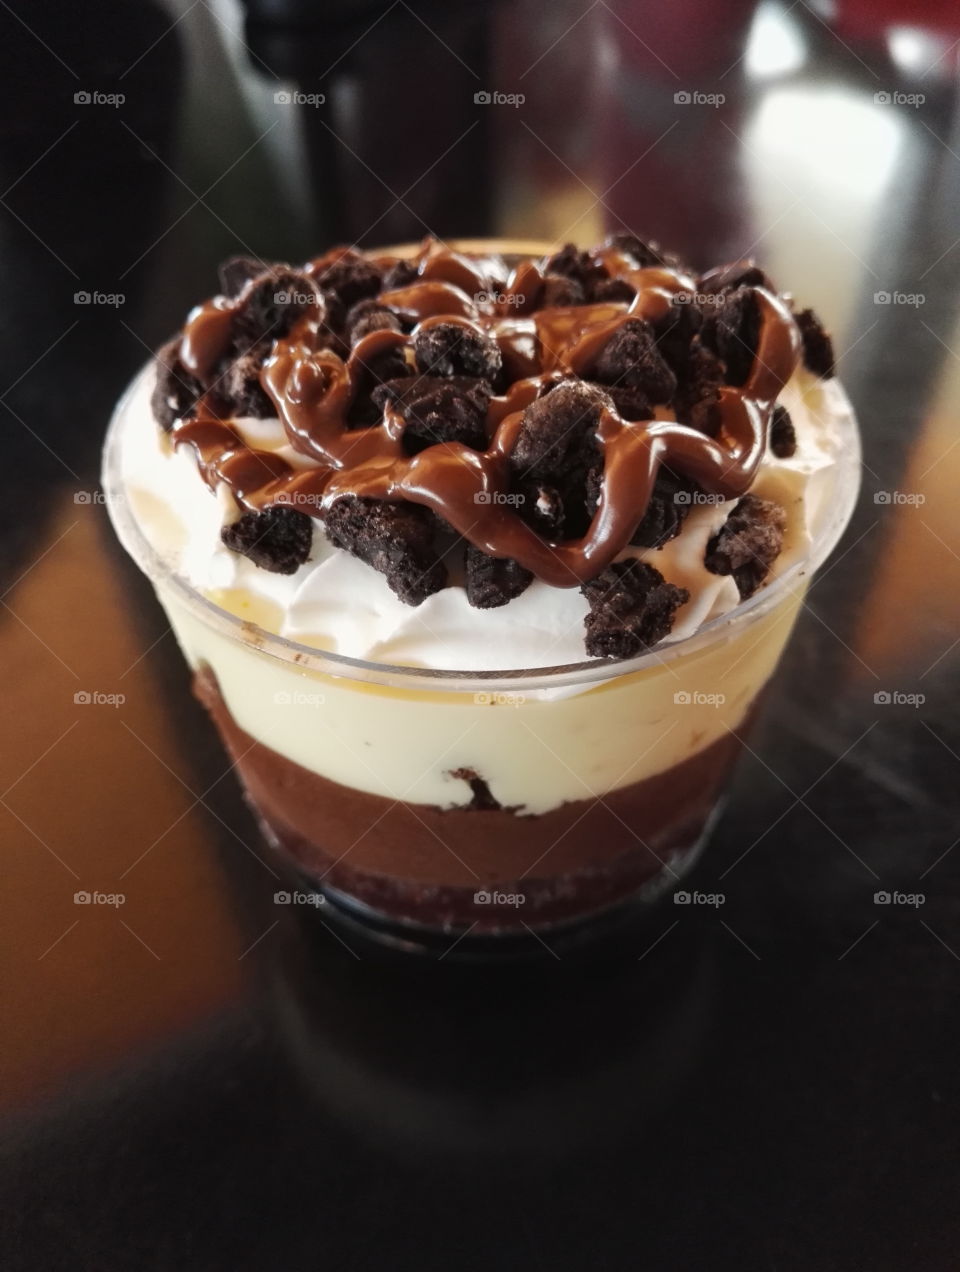 sweet for coffee with cream, cookie, caramel sauce in clear cup